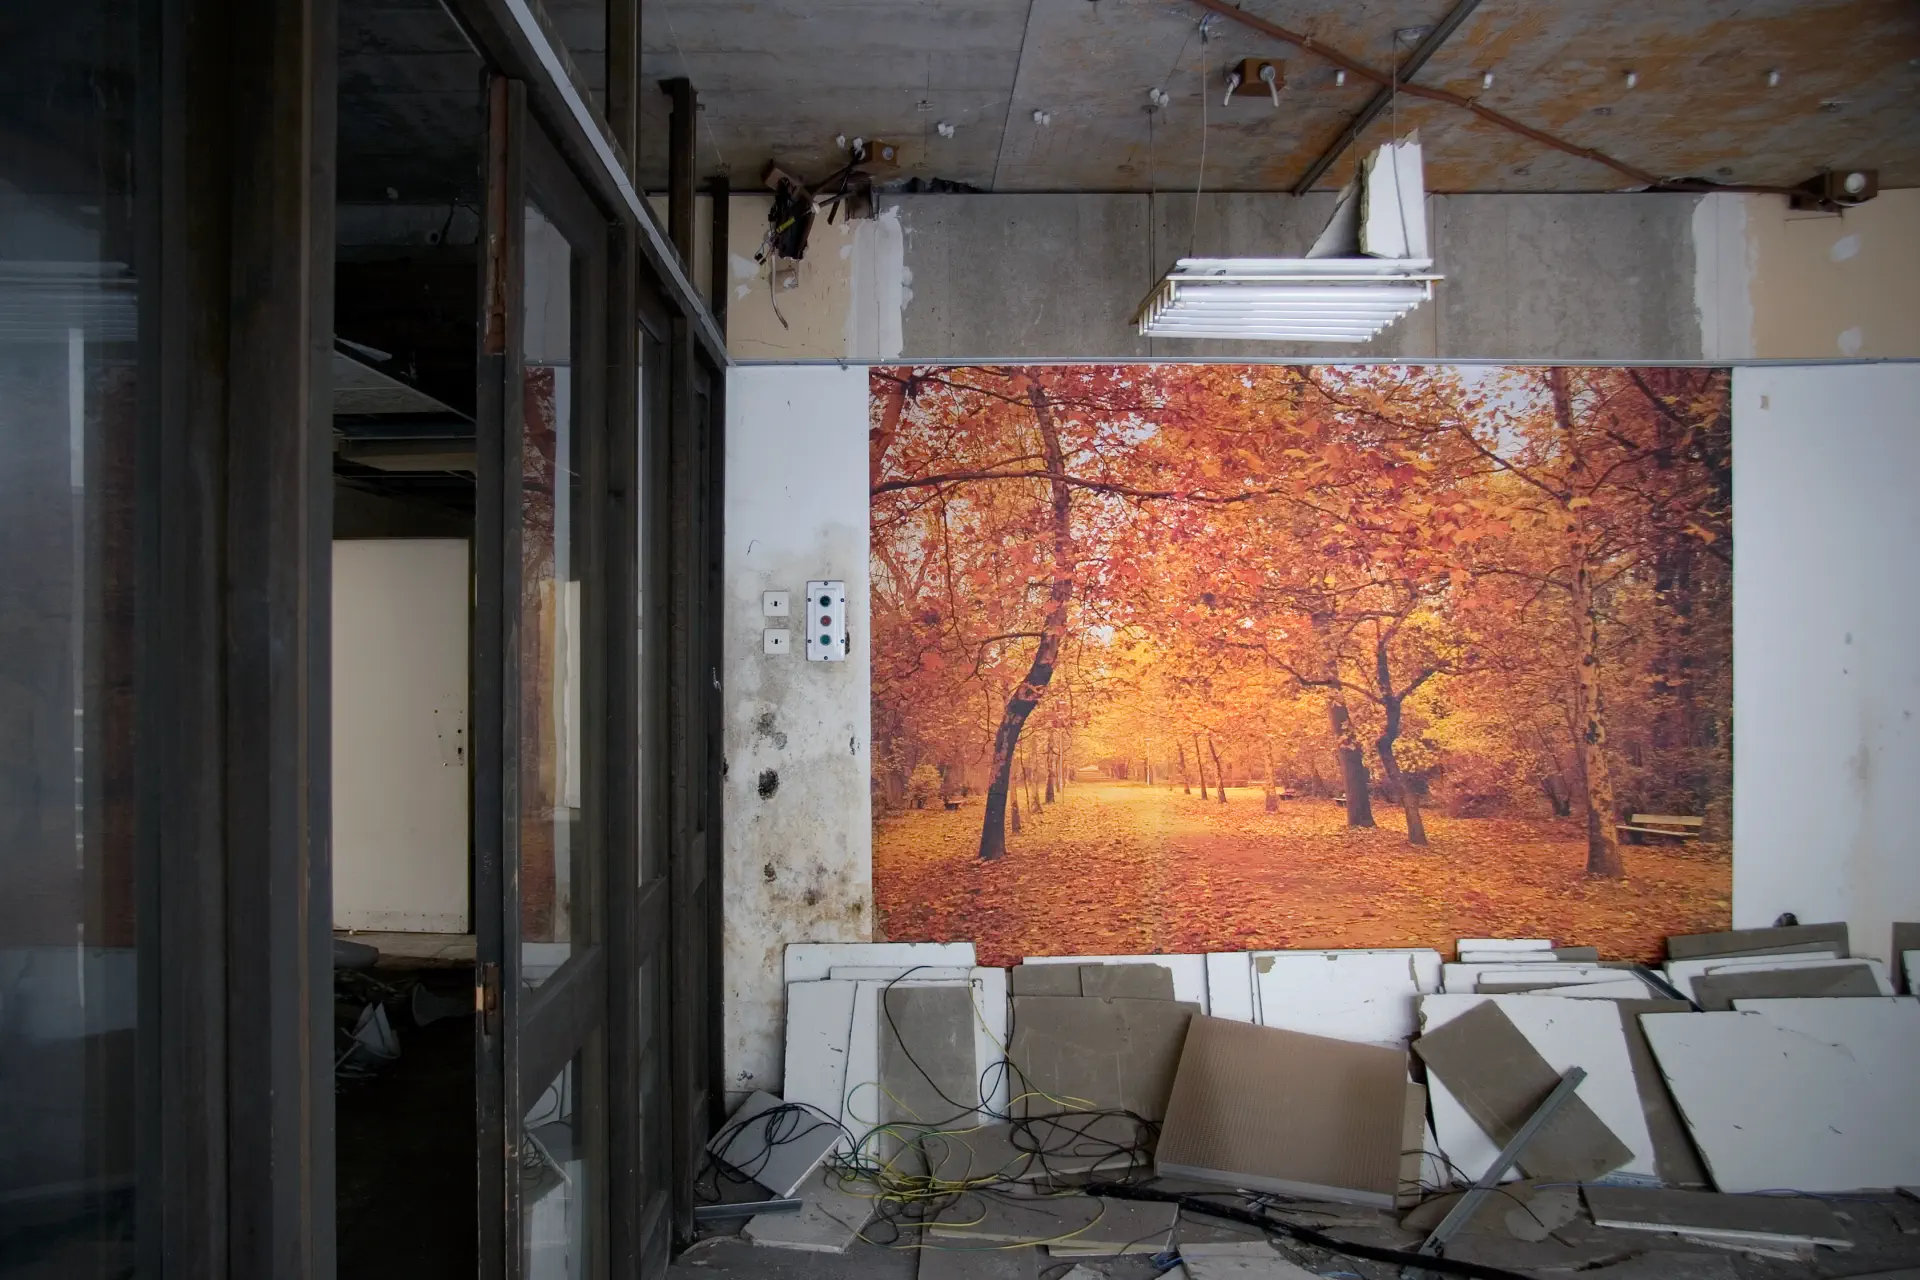 Dilapidated room, with wallpaper depicting autumn landscape.